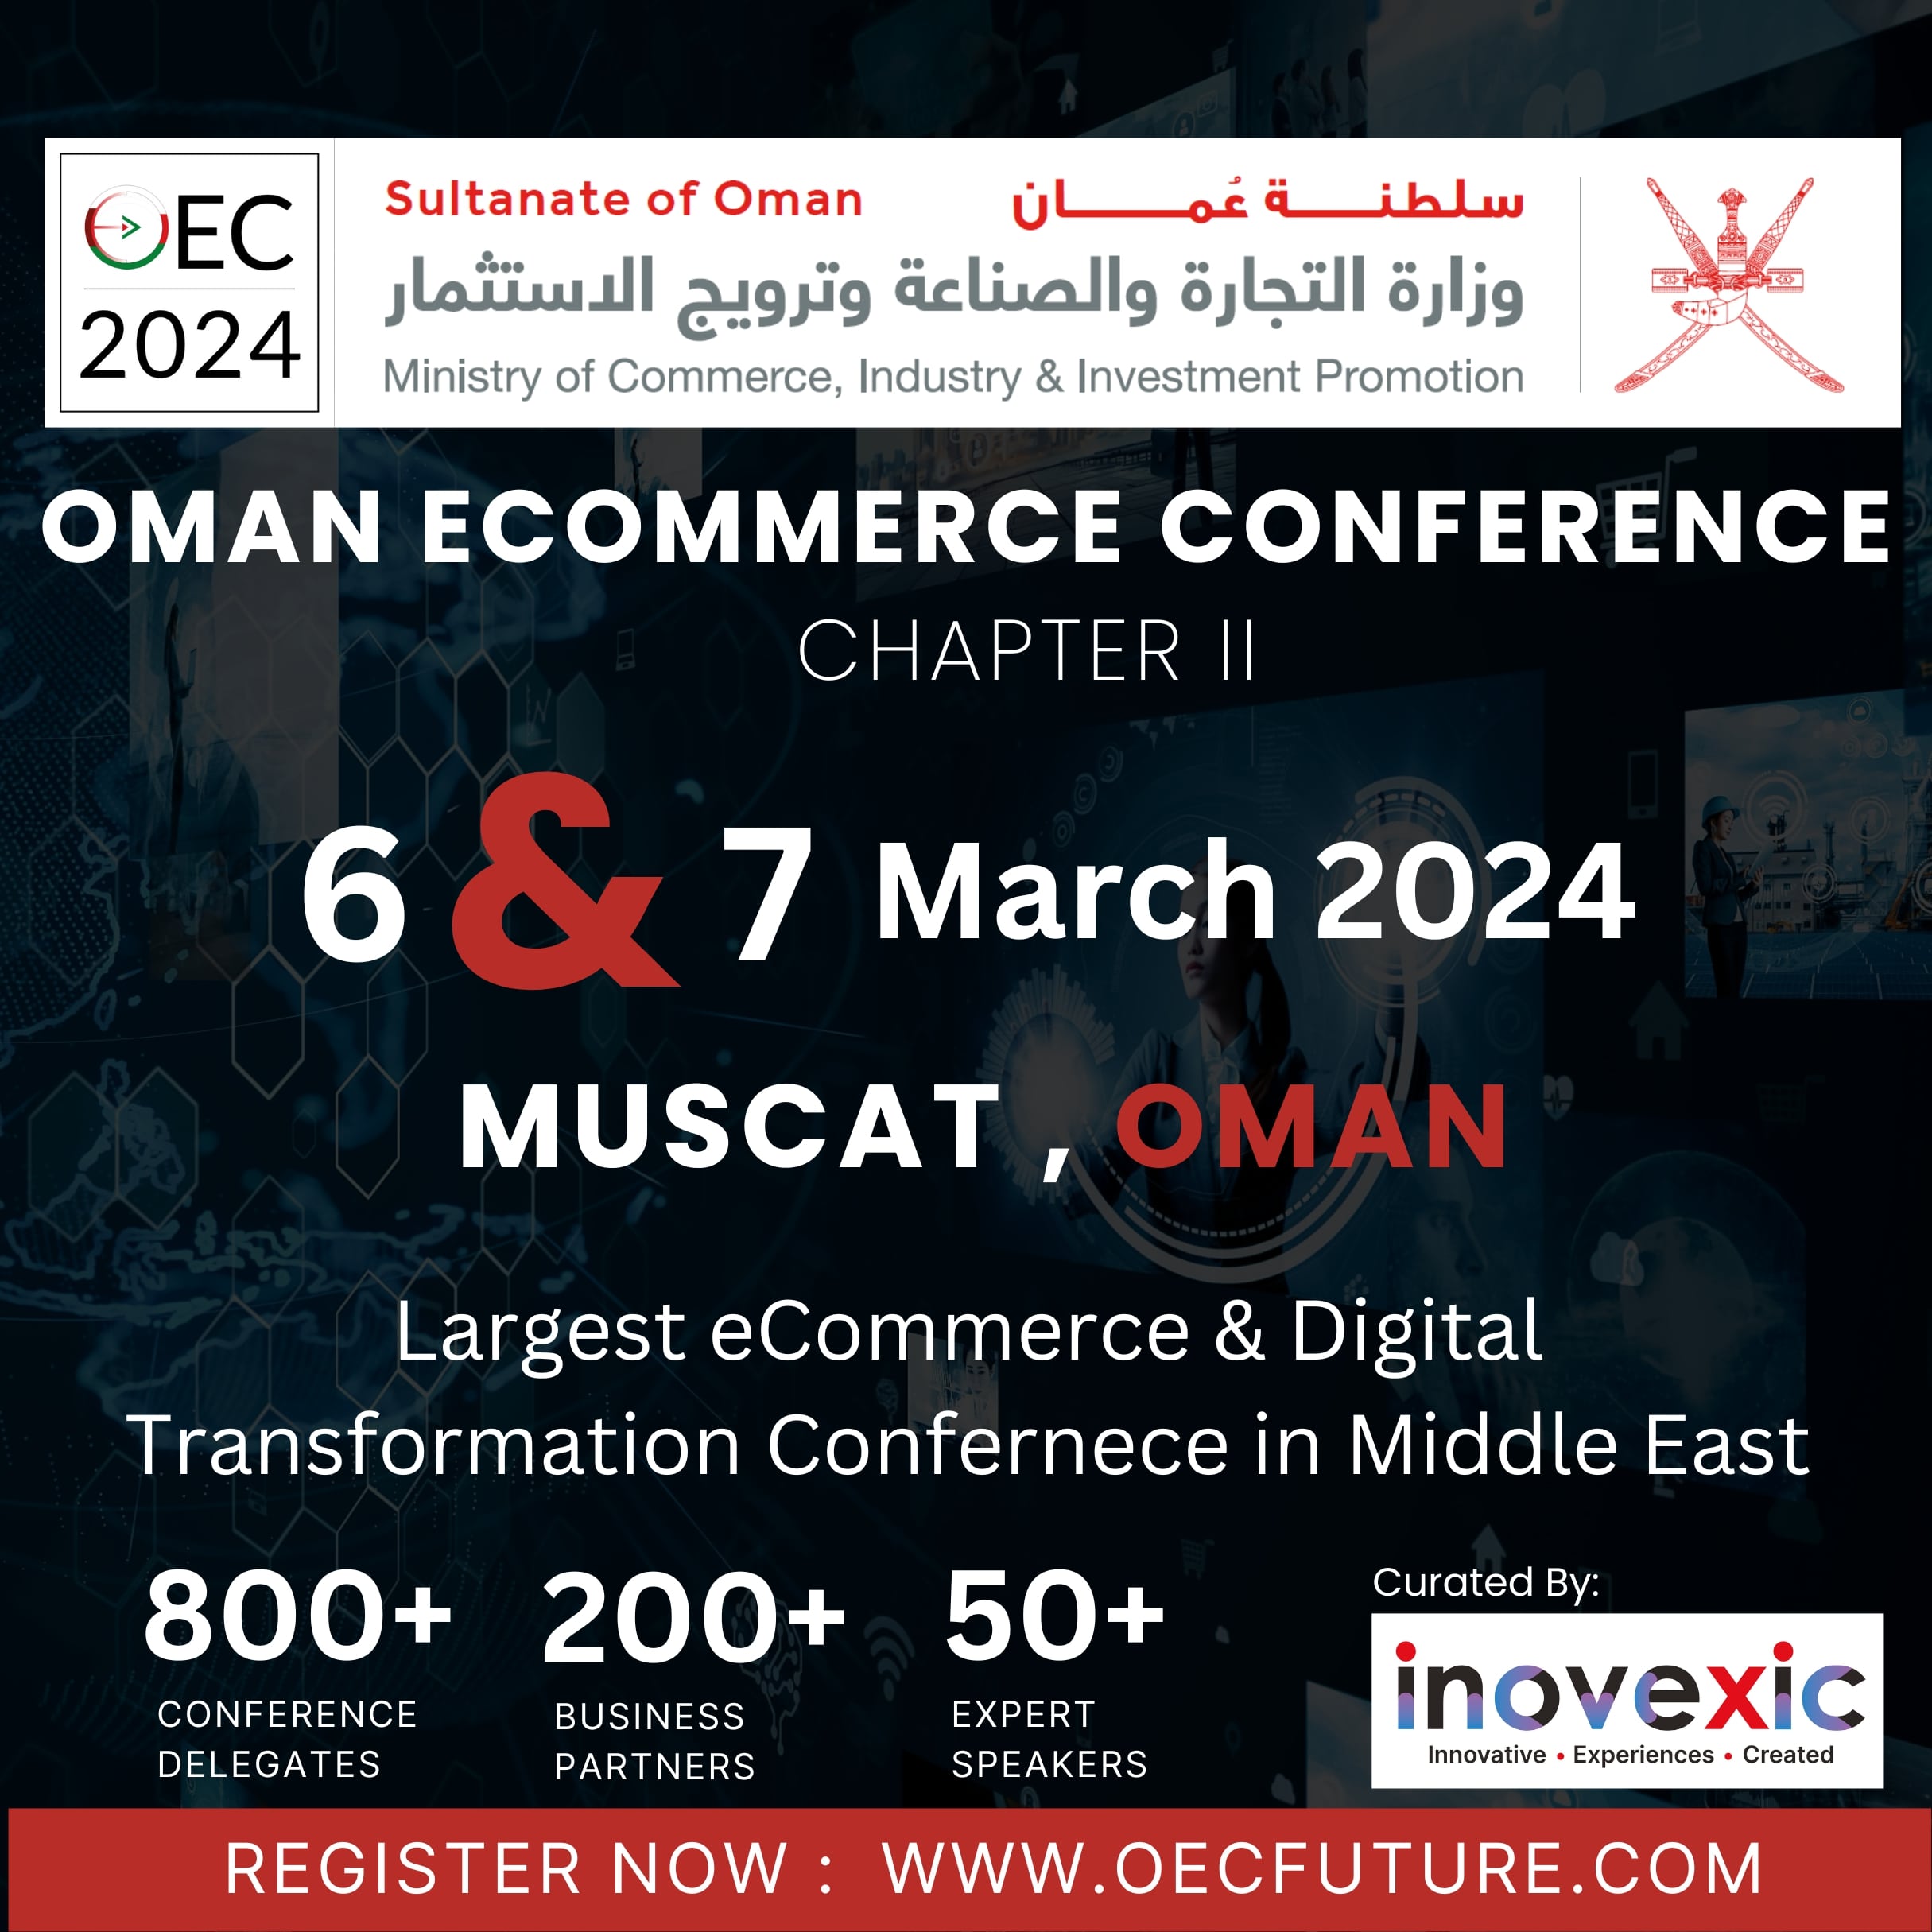 Oman eCommerce Conference - Chapter II, Muscat Oman, Muscat, Oman